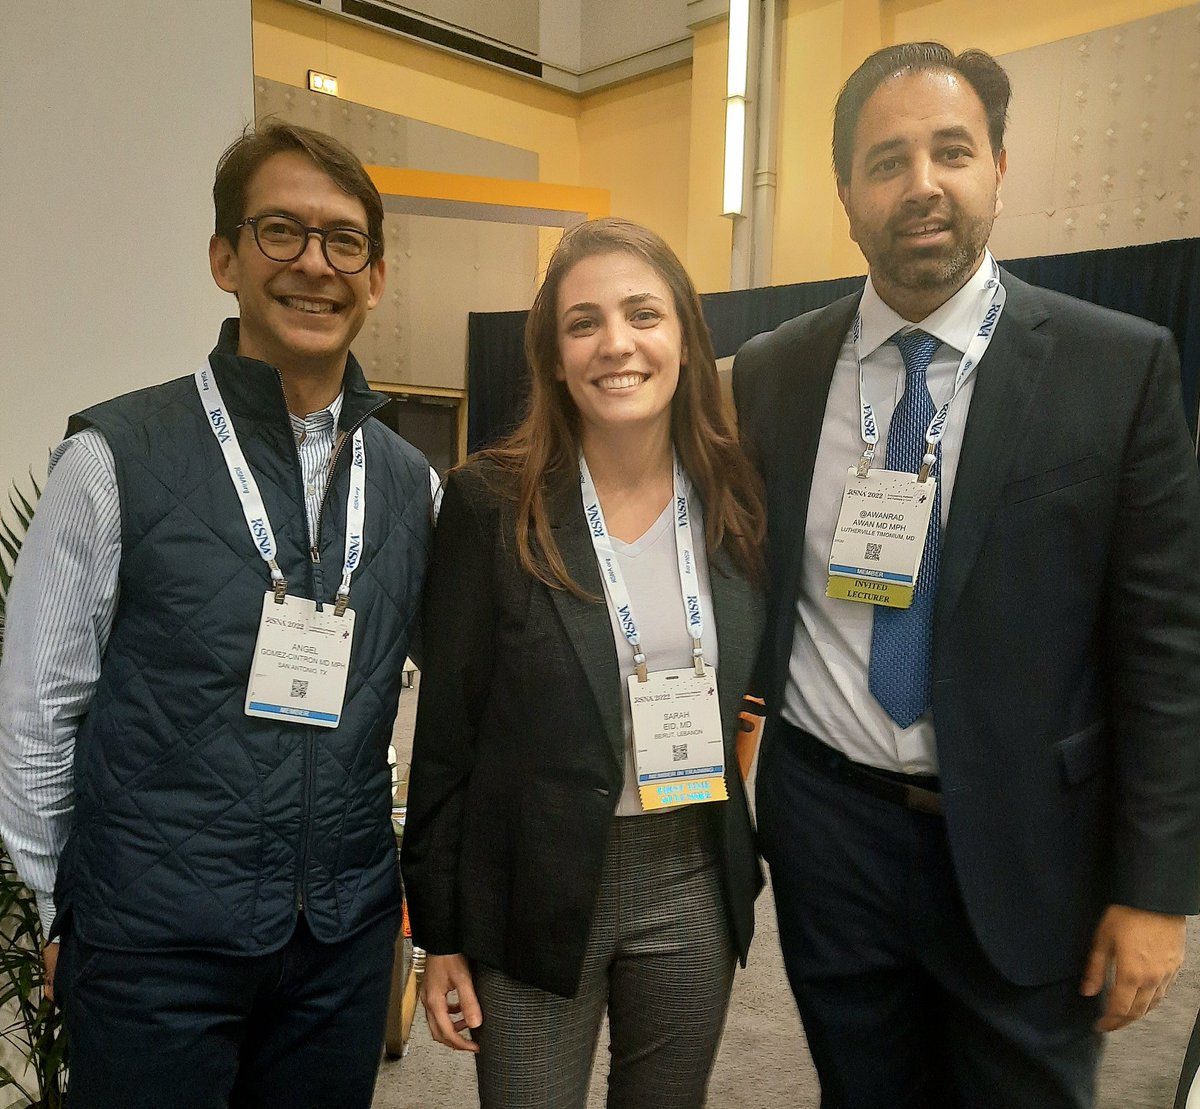 Day 2 #RSNA2022 highlight: Meeting two of the biggest Radiology stars at once!  @skeletalrad @AwanRad
They made a huge impact on my training as well as on the training of thousands. My smile says it all 🤗 
#radres